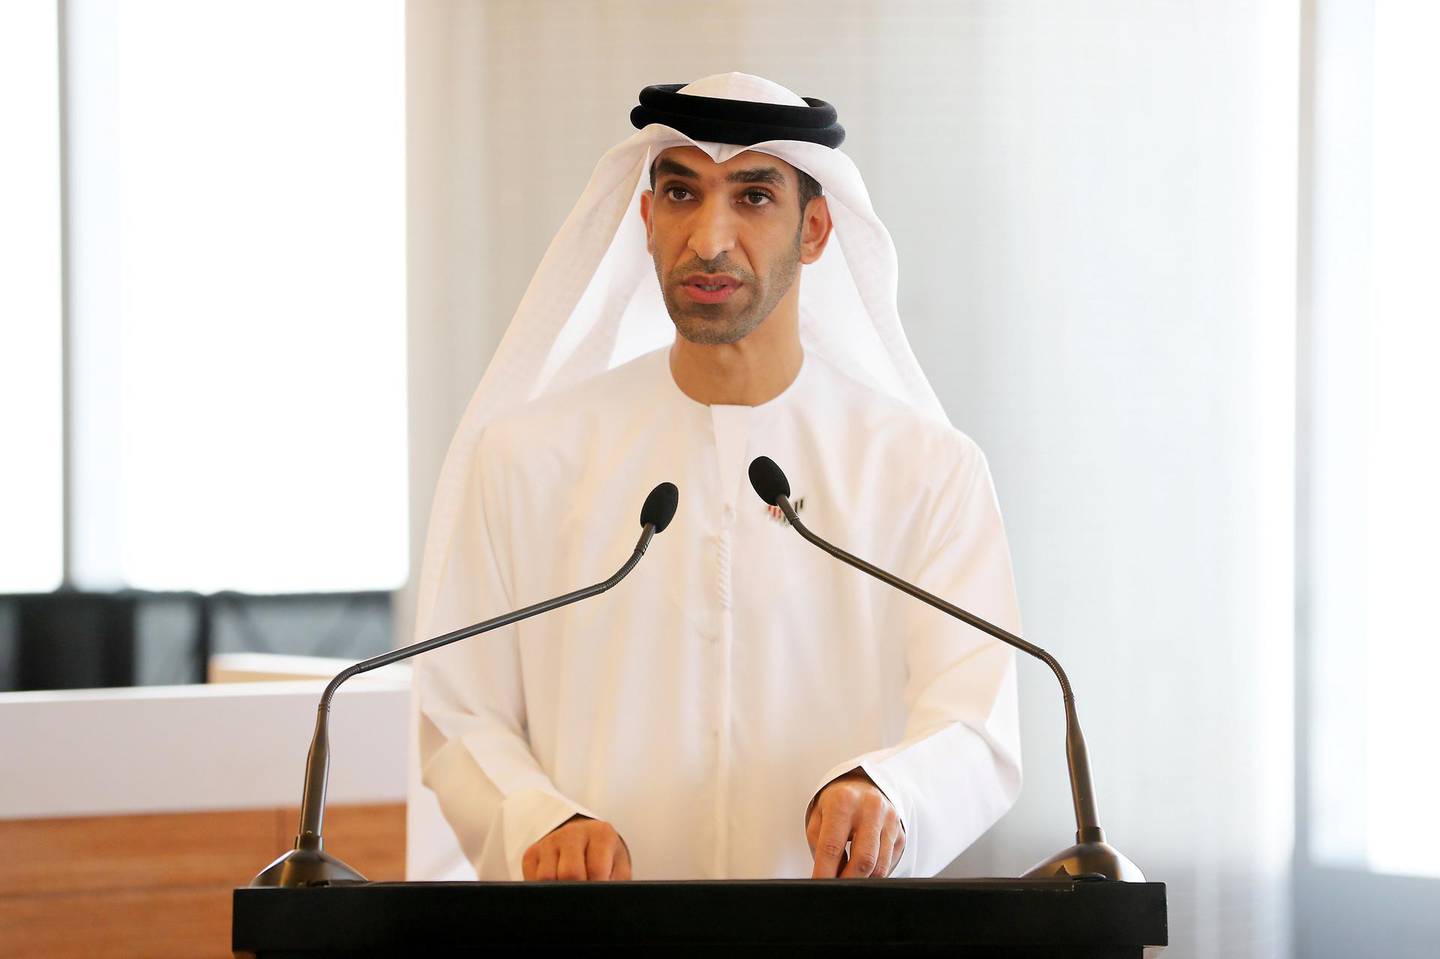 Dr Thani Bin Ahmed Zeyoudi, UAE Minister of States for Foreign Trade speaking during the opening of Crypto Centre at Almas Tower in JLT in Dubai on May 24,2021. Pawan Singh / The National. Story by Alkesh